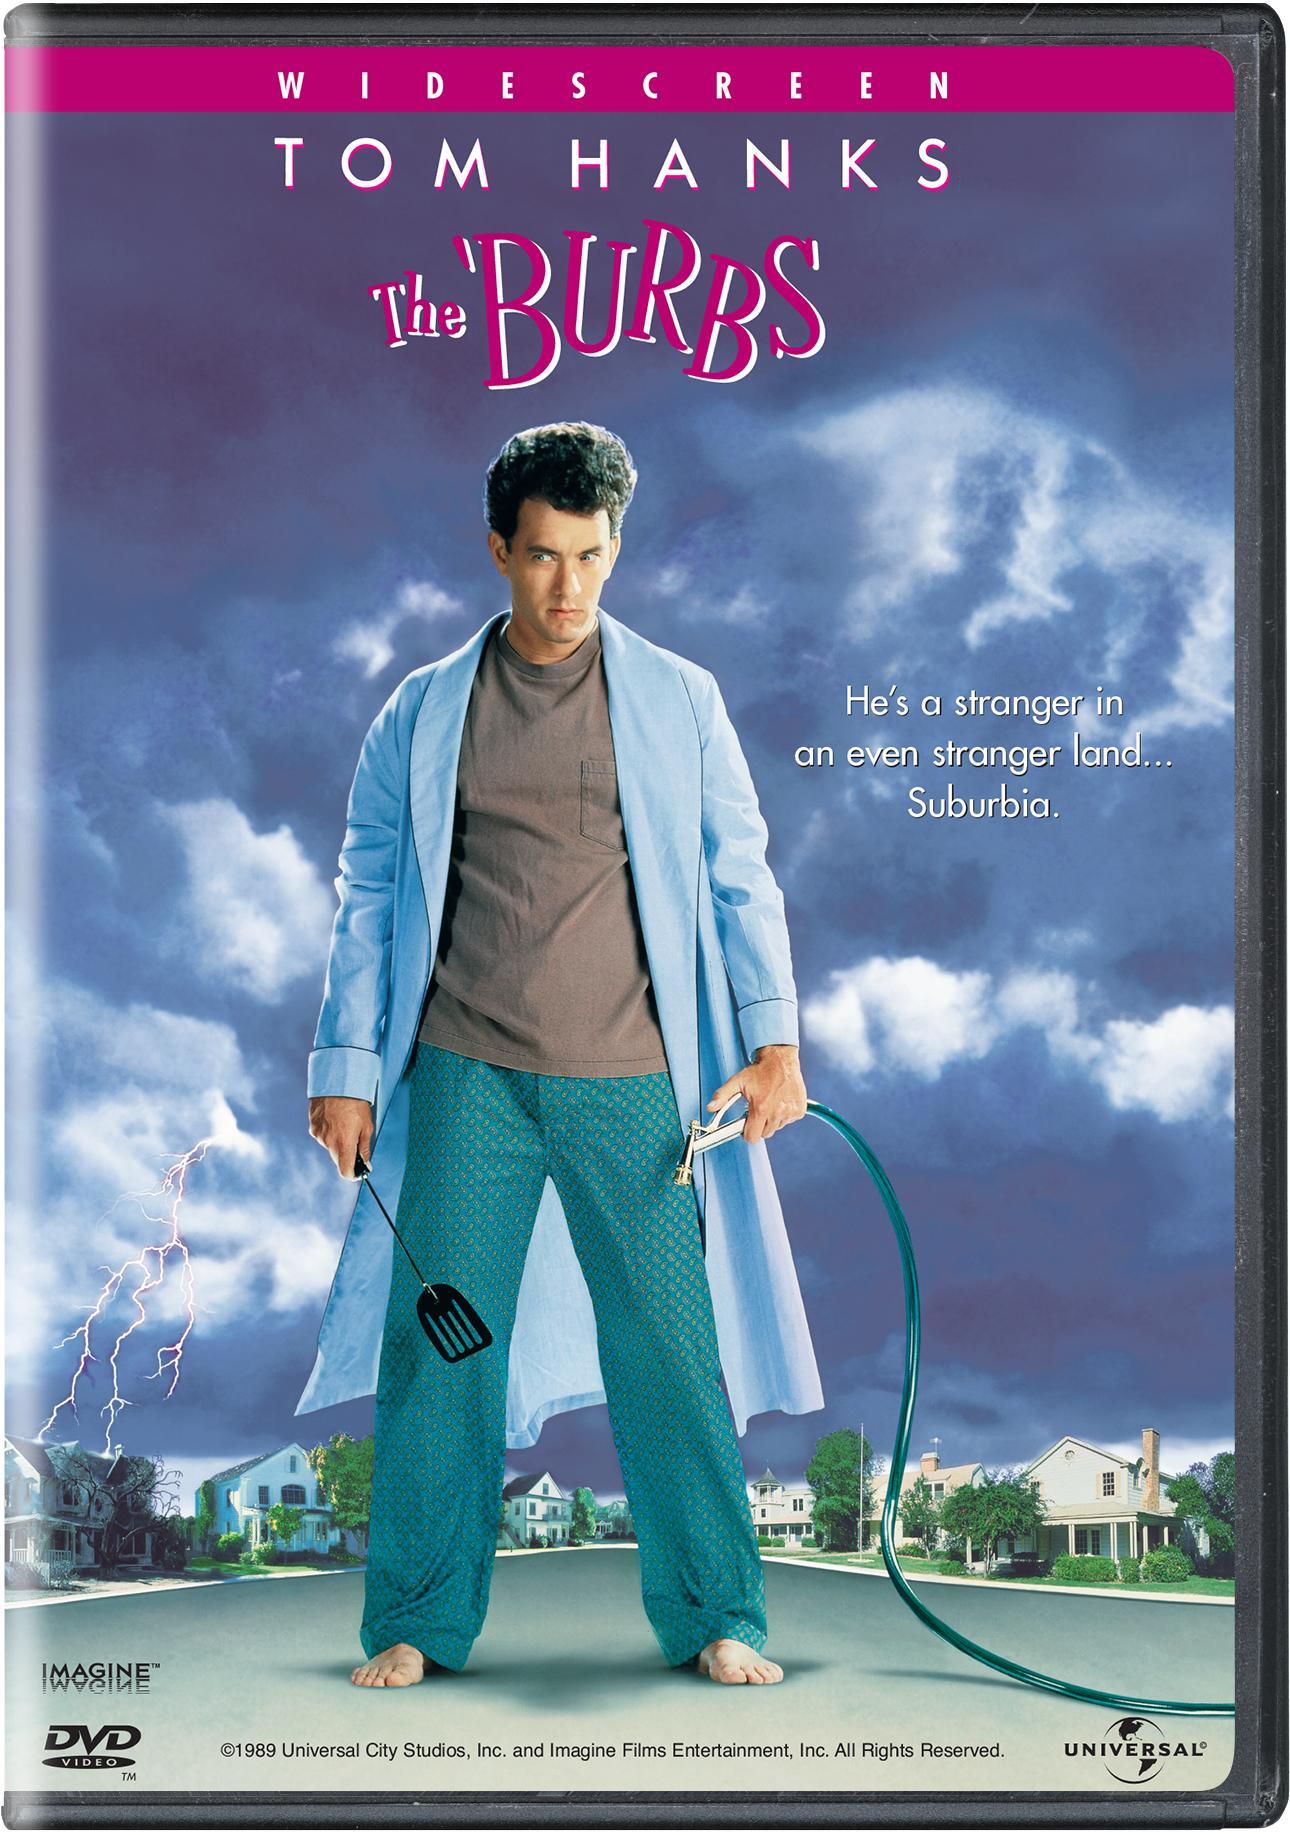 The 'Burbs - DVD [ 1989 ]  - Comedy Movies On DVD - Movies On GRUV